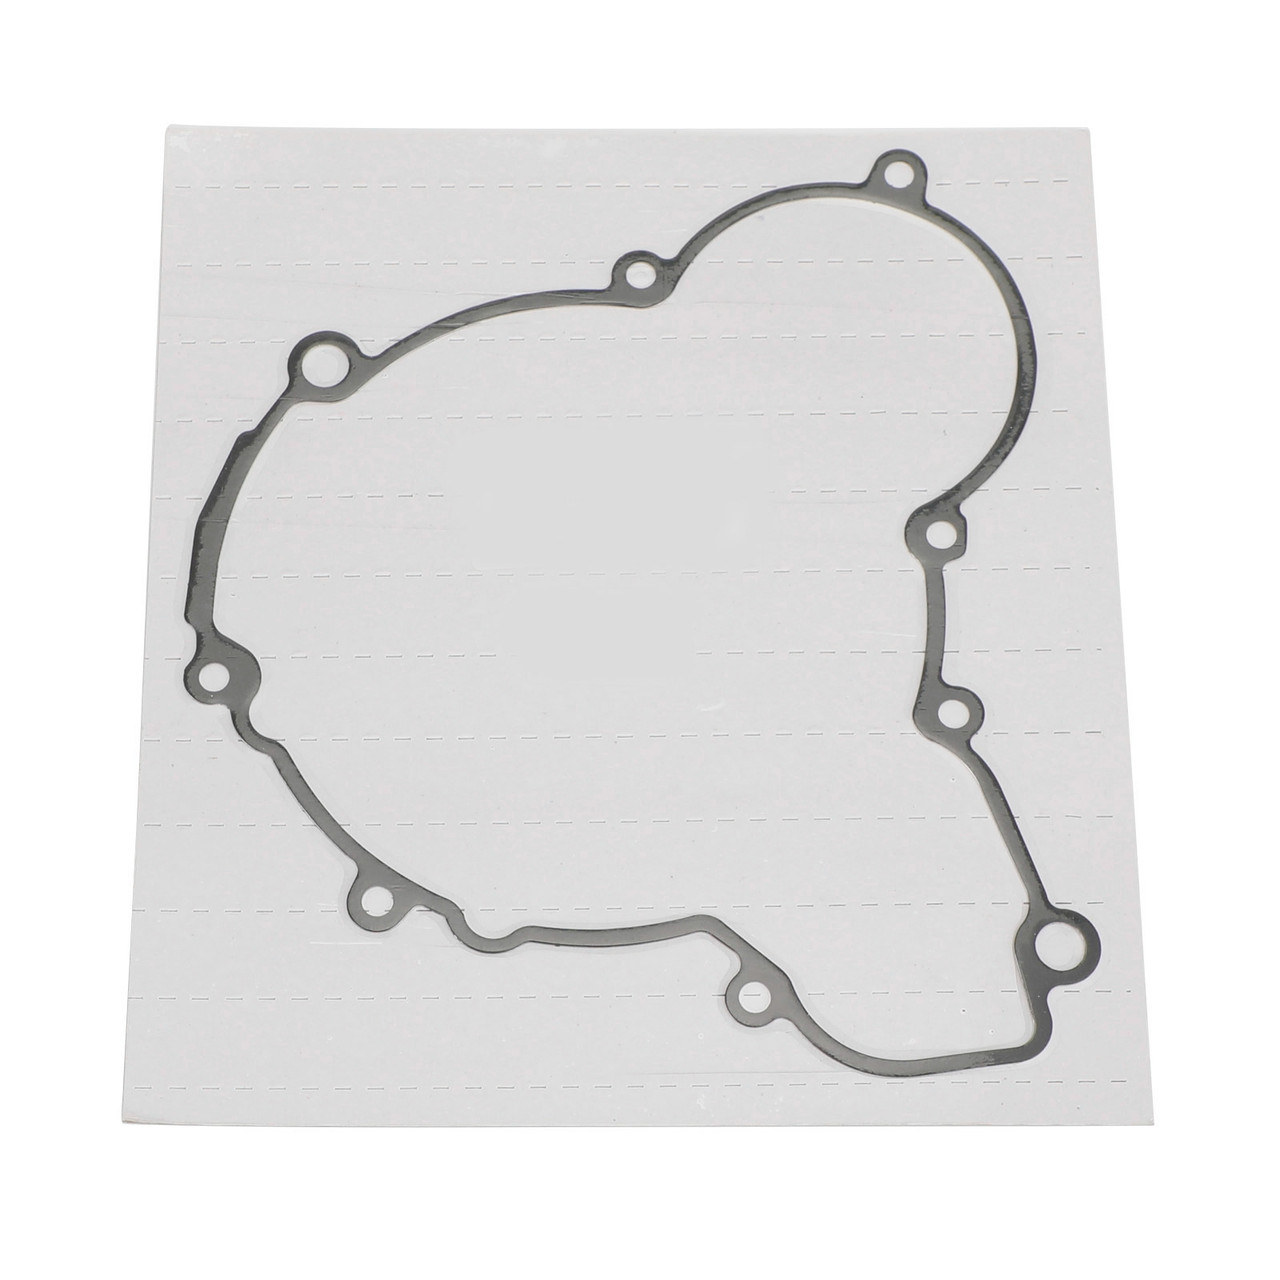 3 Ignition Cover Gasket For Husqvarna TE 250/300 TX 300/i EXC 250/300 2017-2023